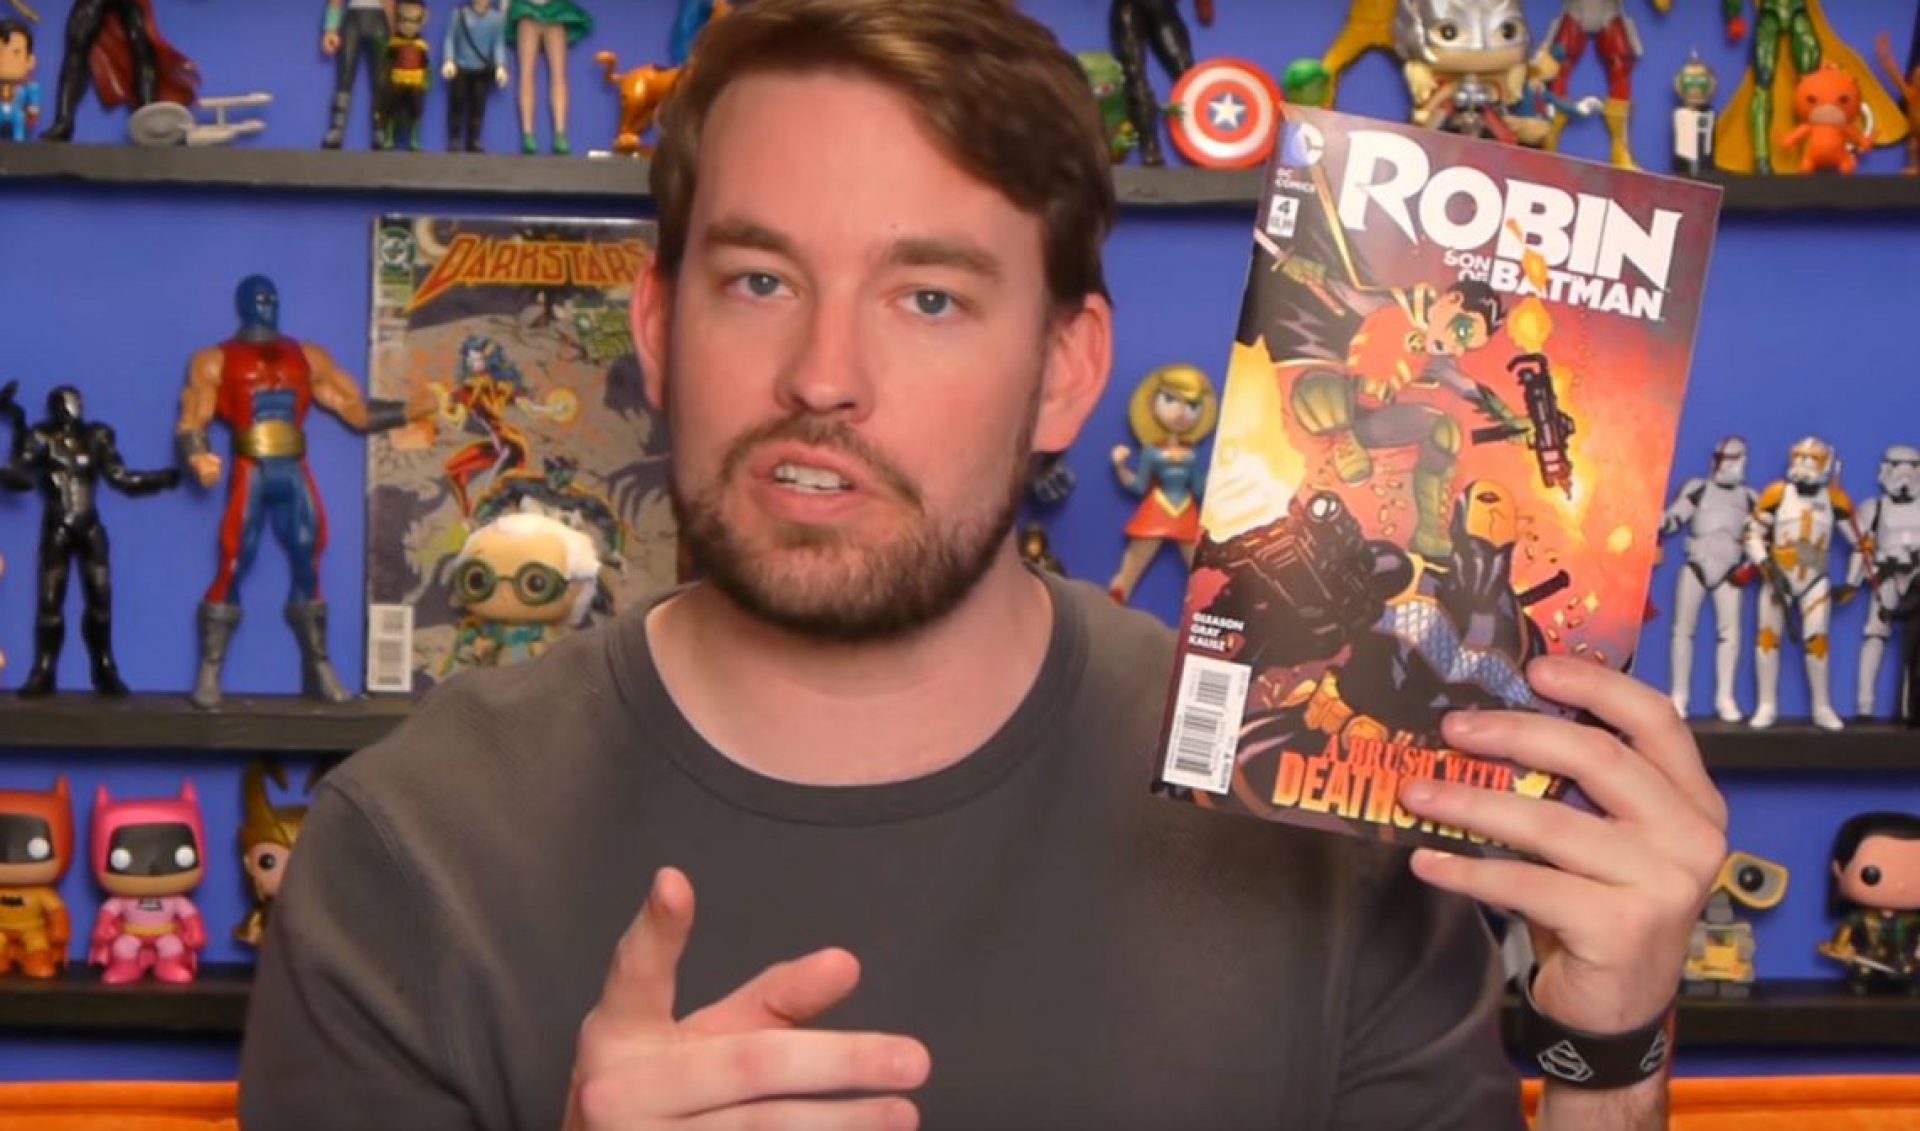 ‘DC All Access’ Host Jason Inman Needs Your Help To Send 10,000 Comics To Soldiers